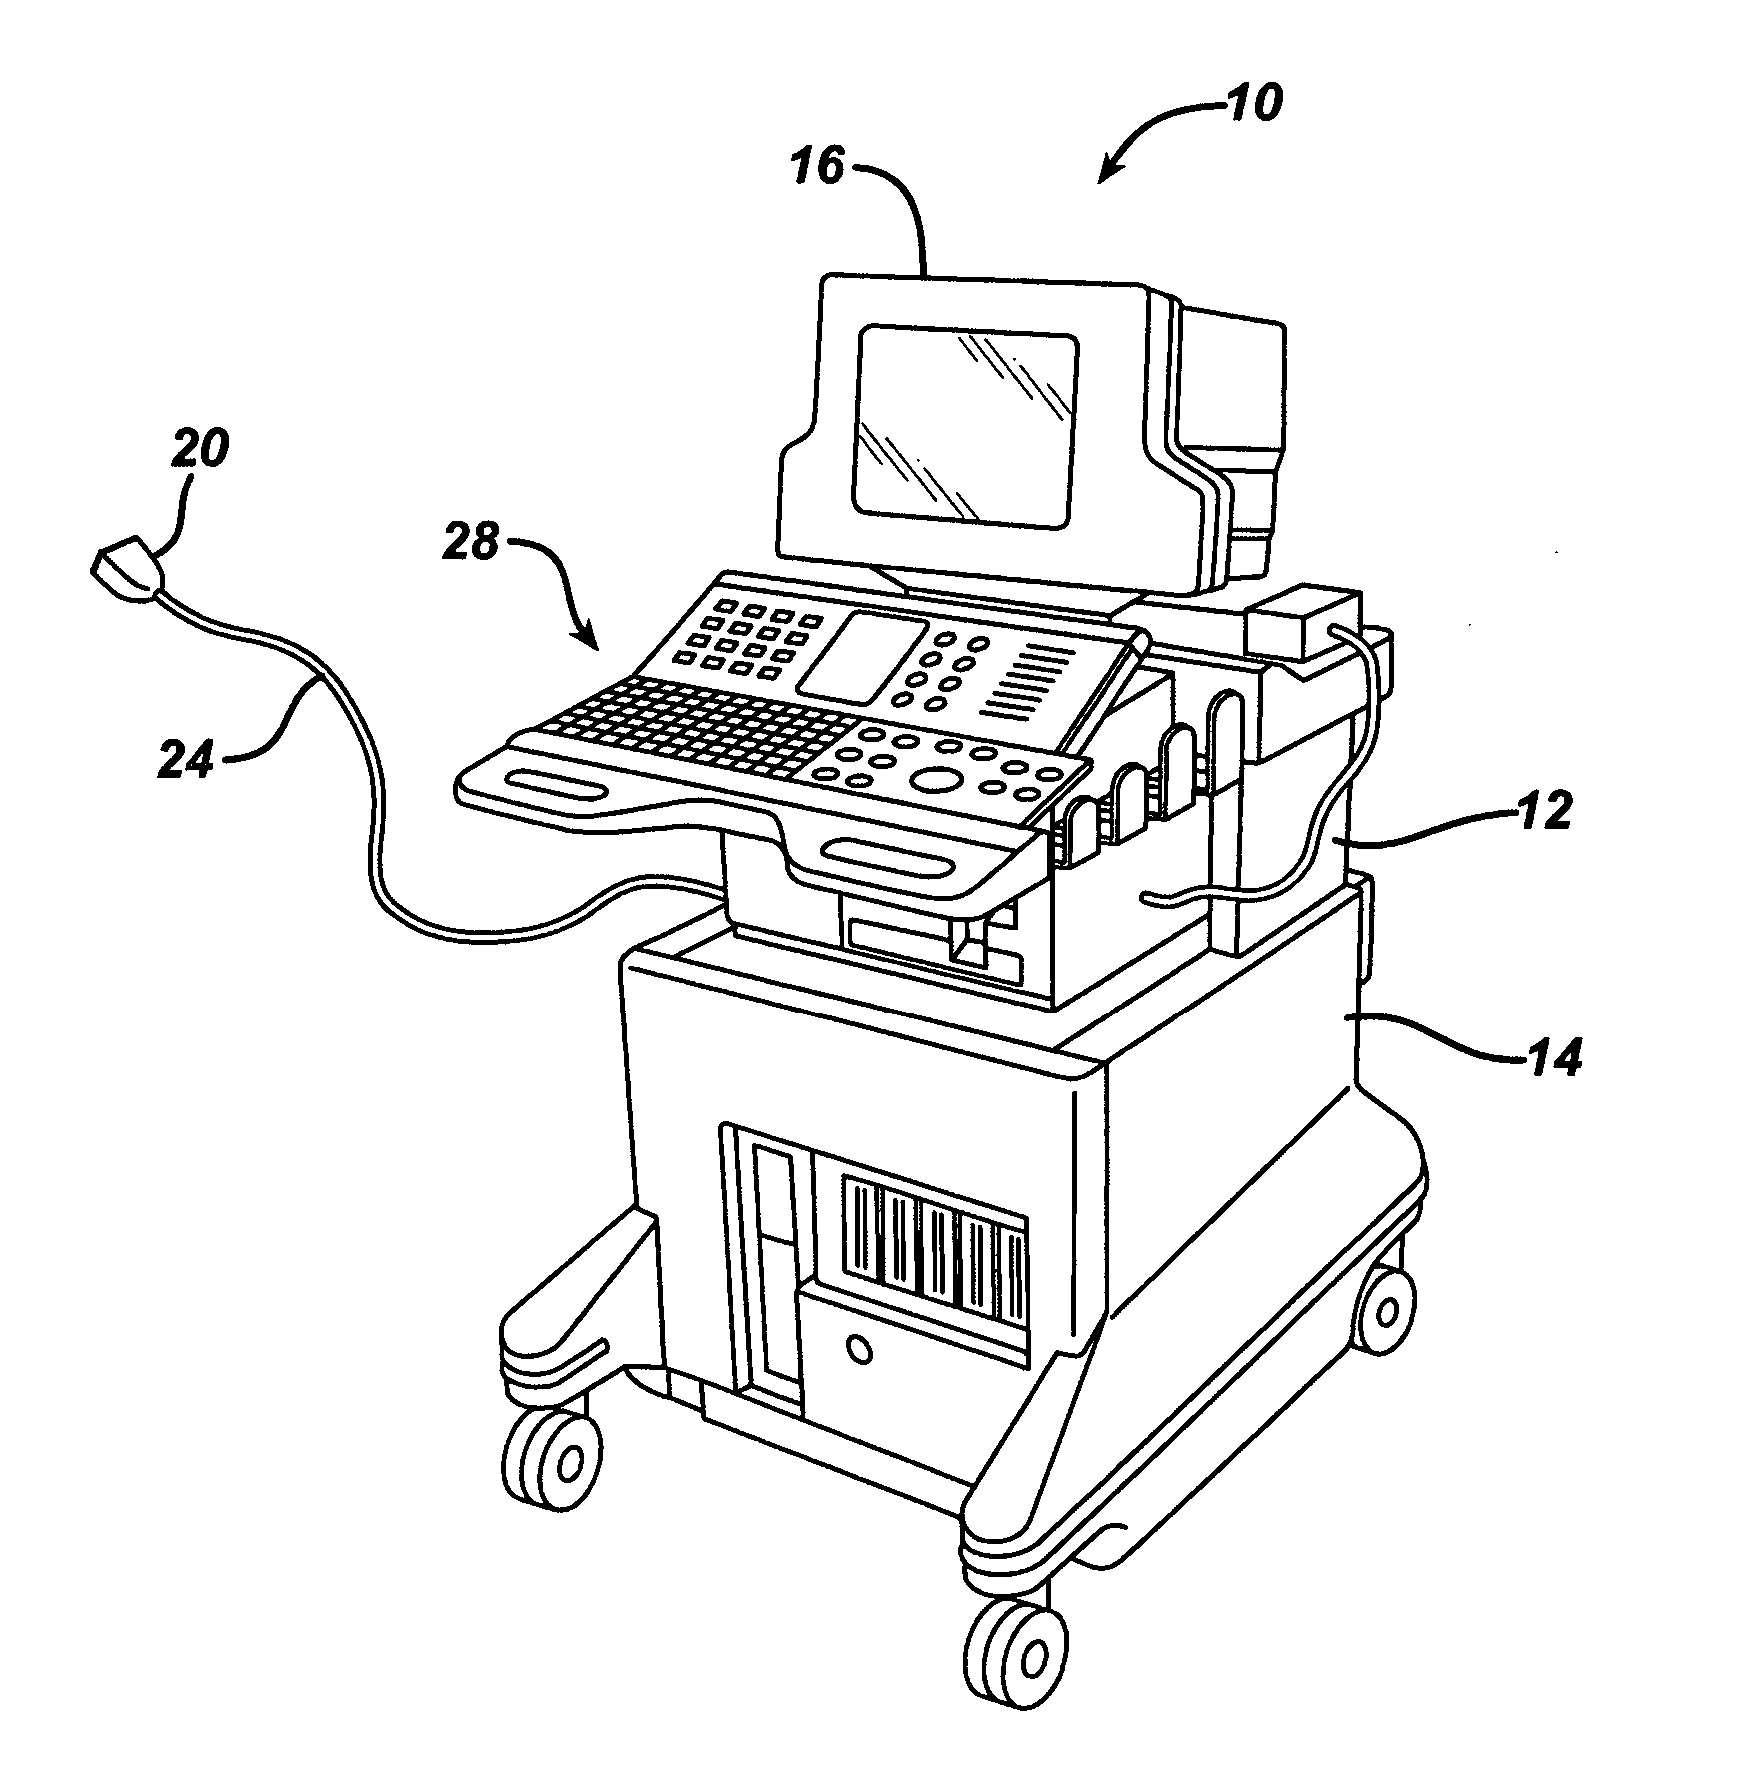 System and method for using scheduled protocol codes to automatically configure ultrasound imaging systems